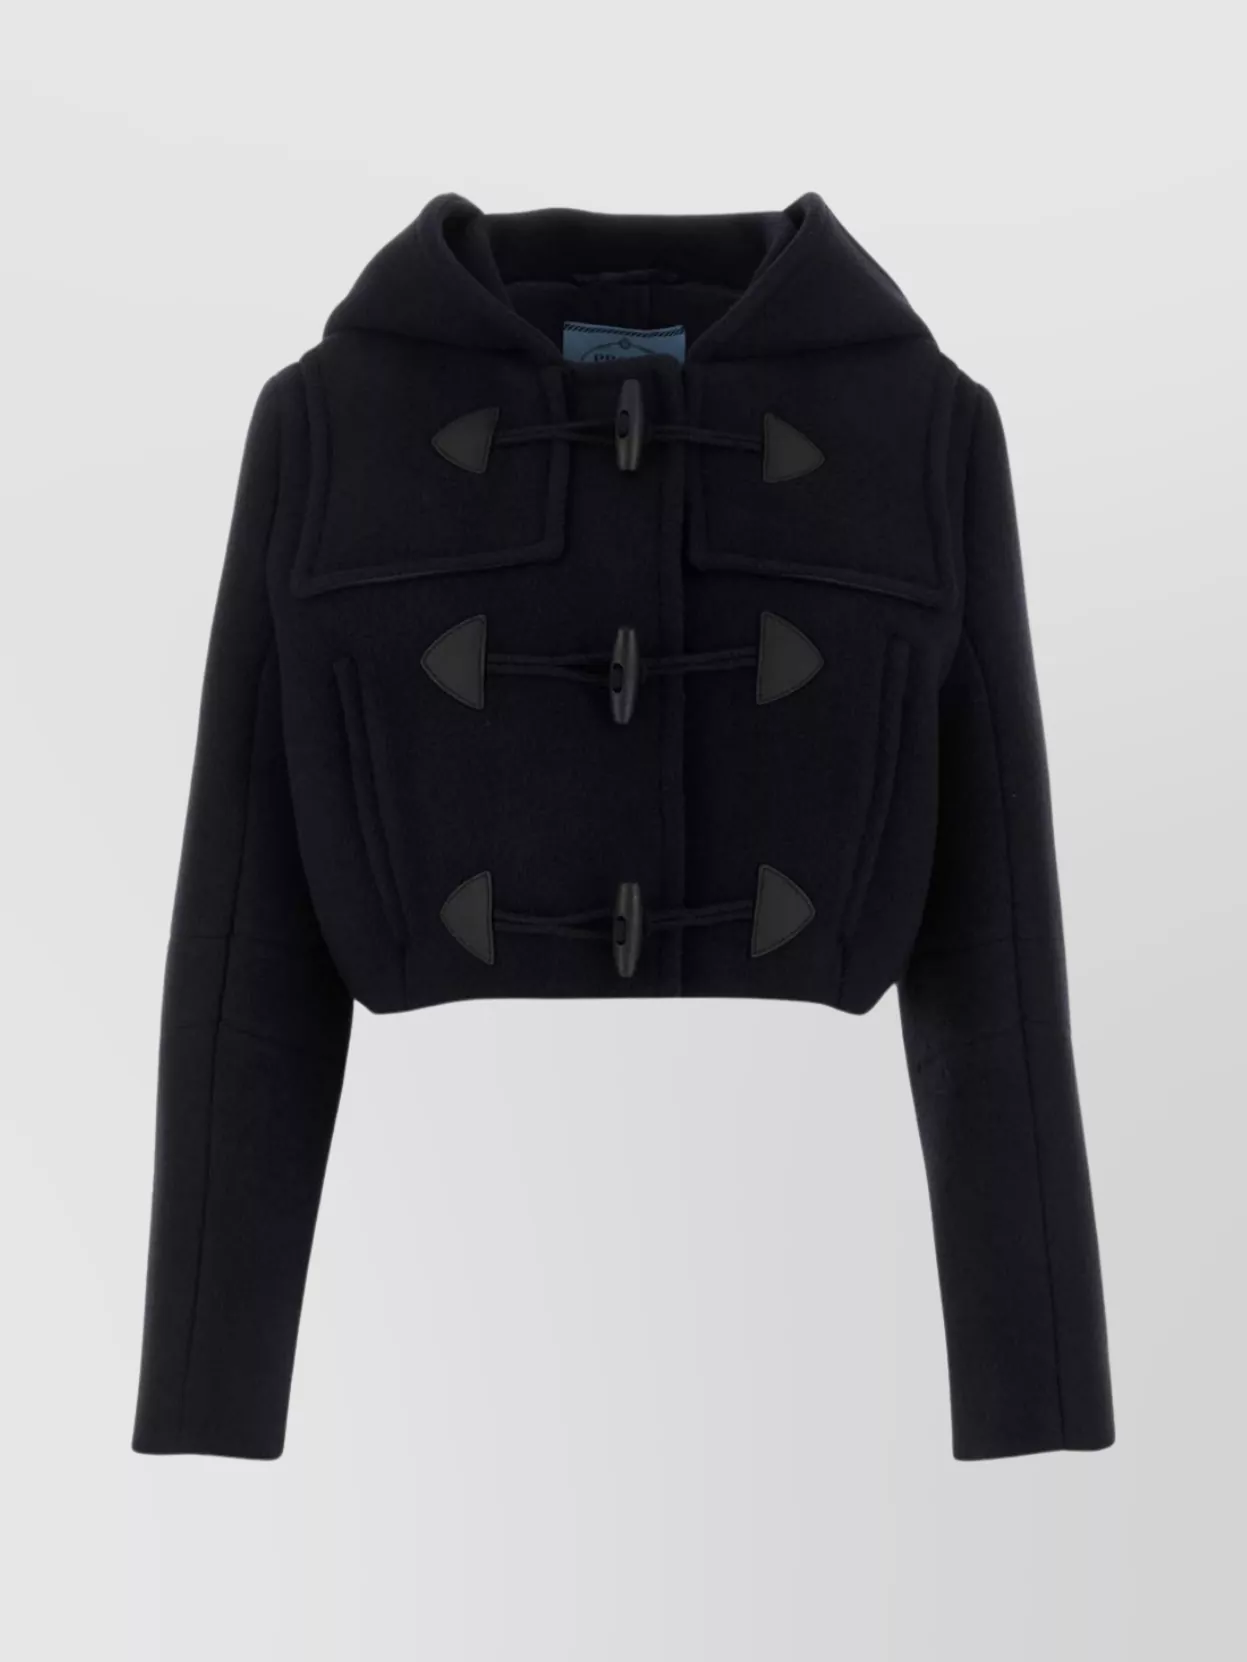 PRADA WOOL COAT WITH CROPPED LENGTH AND STRUCTURED SHOULDERS